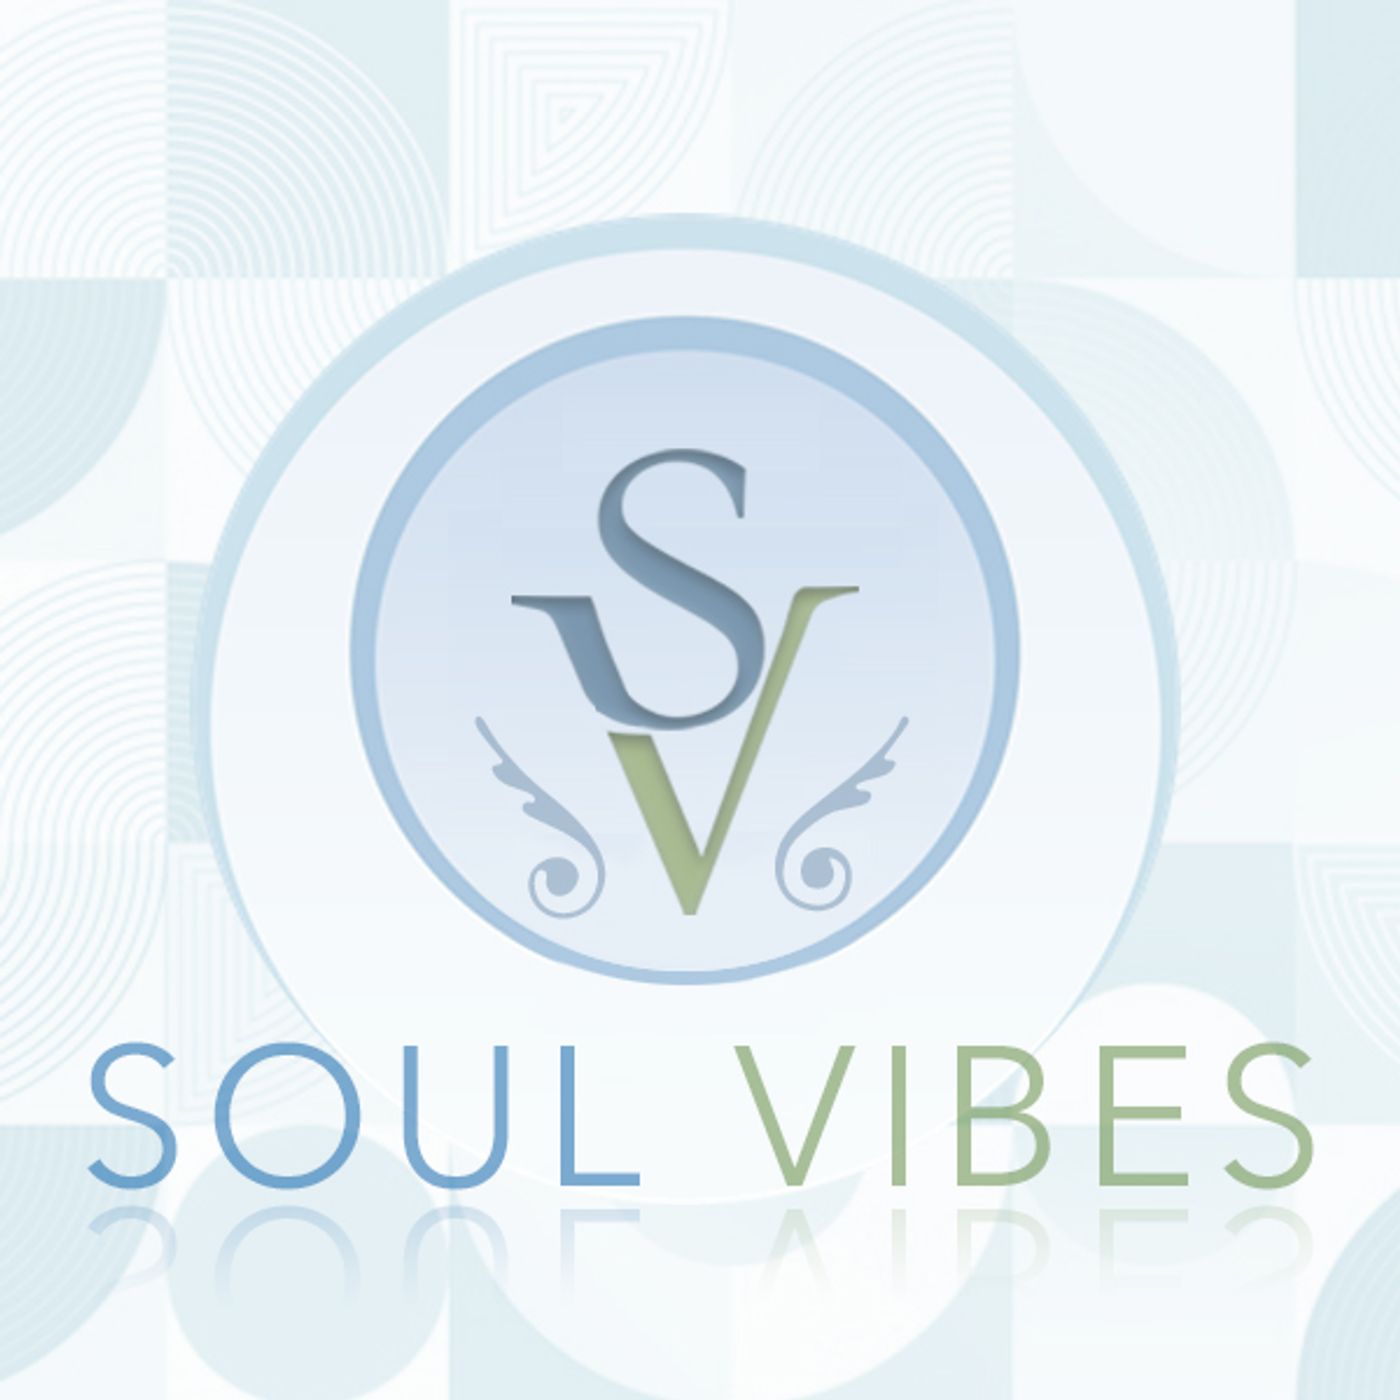 Choice -The Power Harnessed Within: Soul Vibes